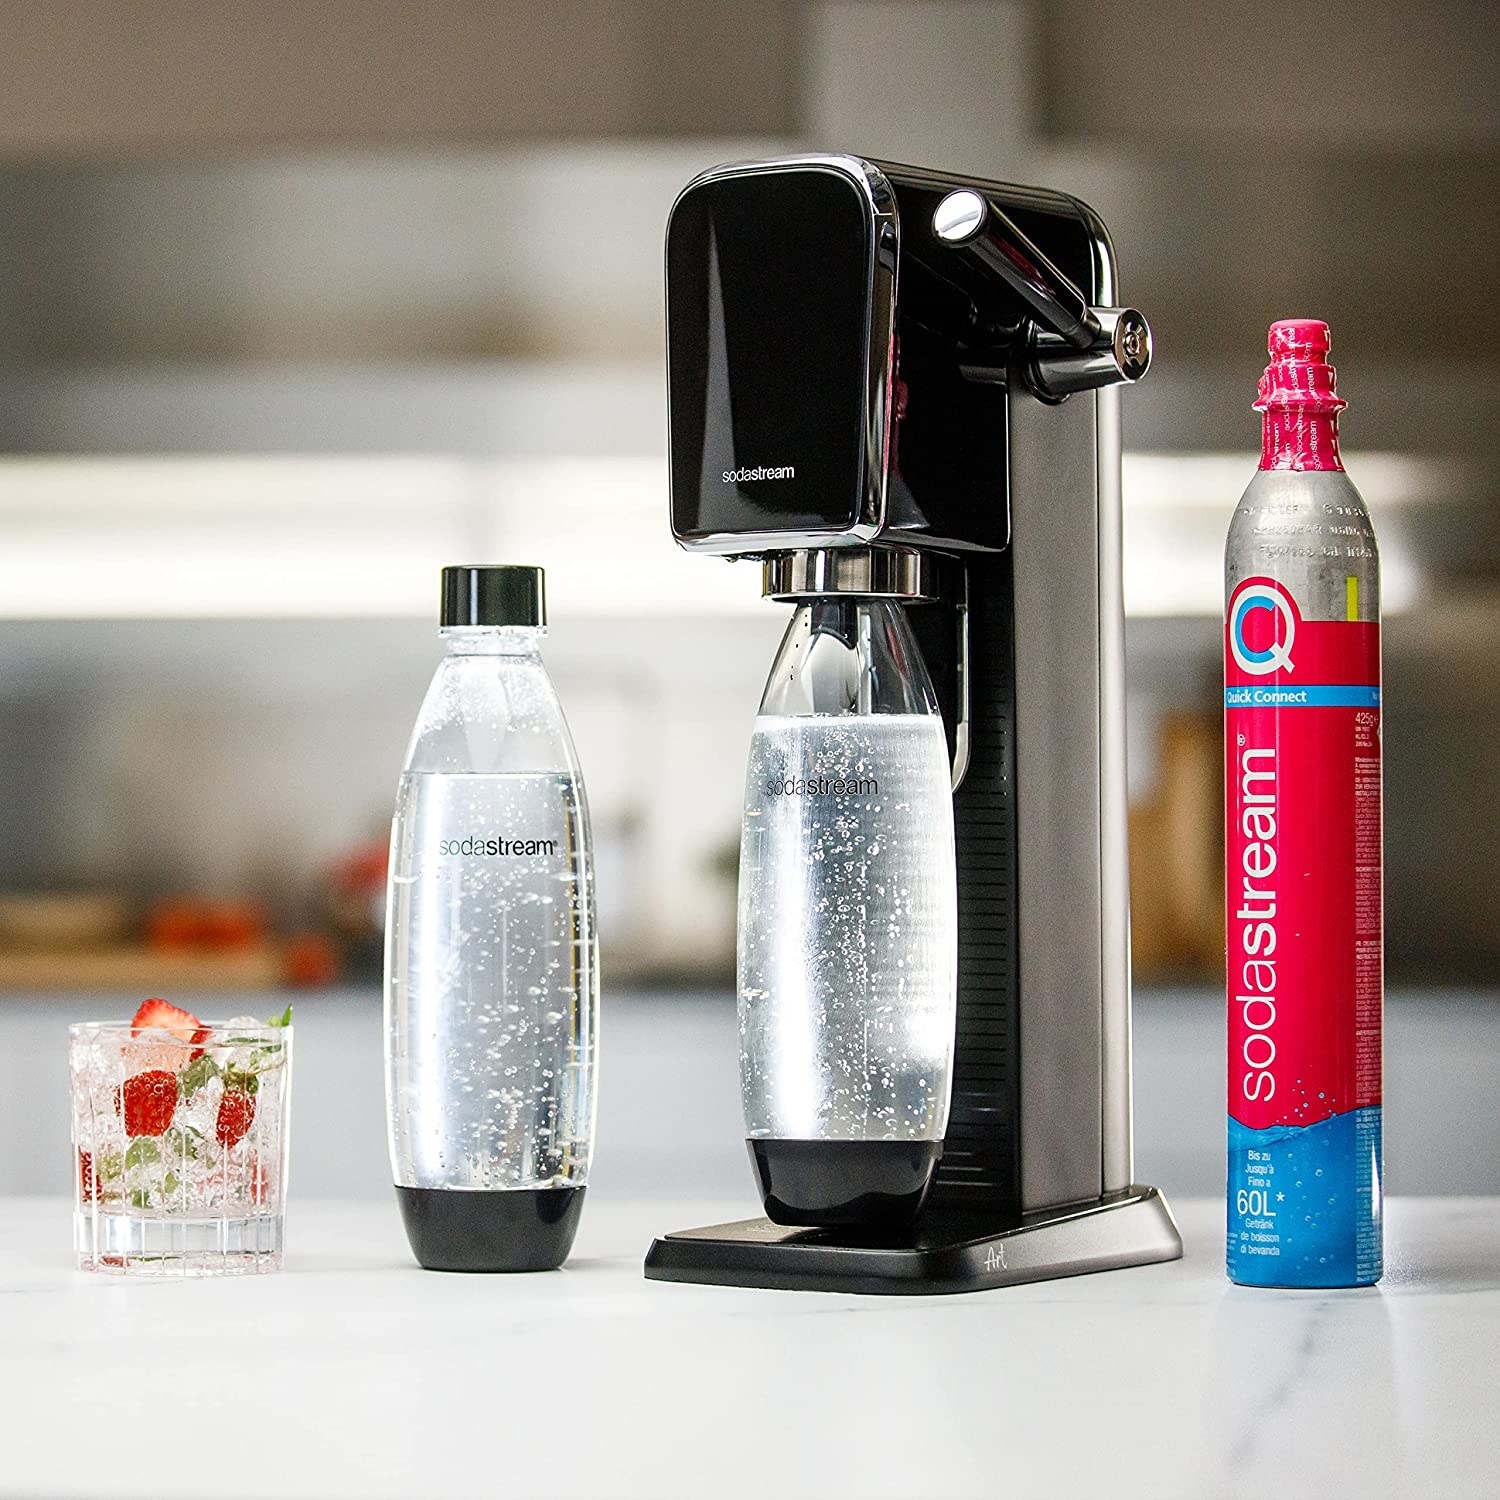 The SodaStream on a counter between a bottle of soda water and a Co2 canister